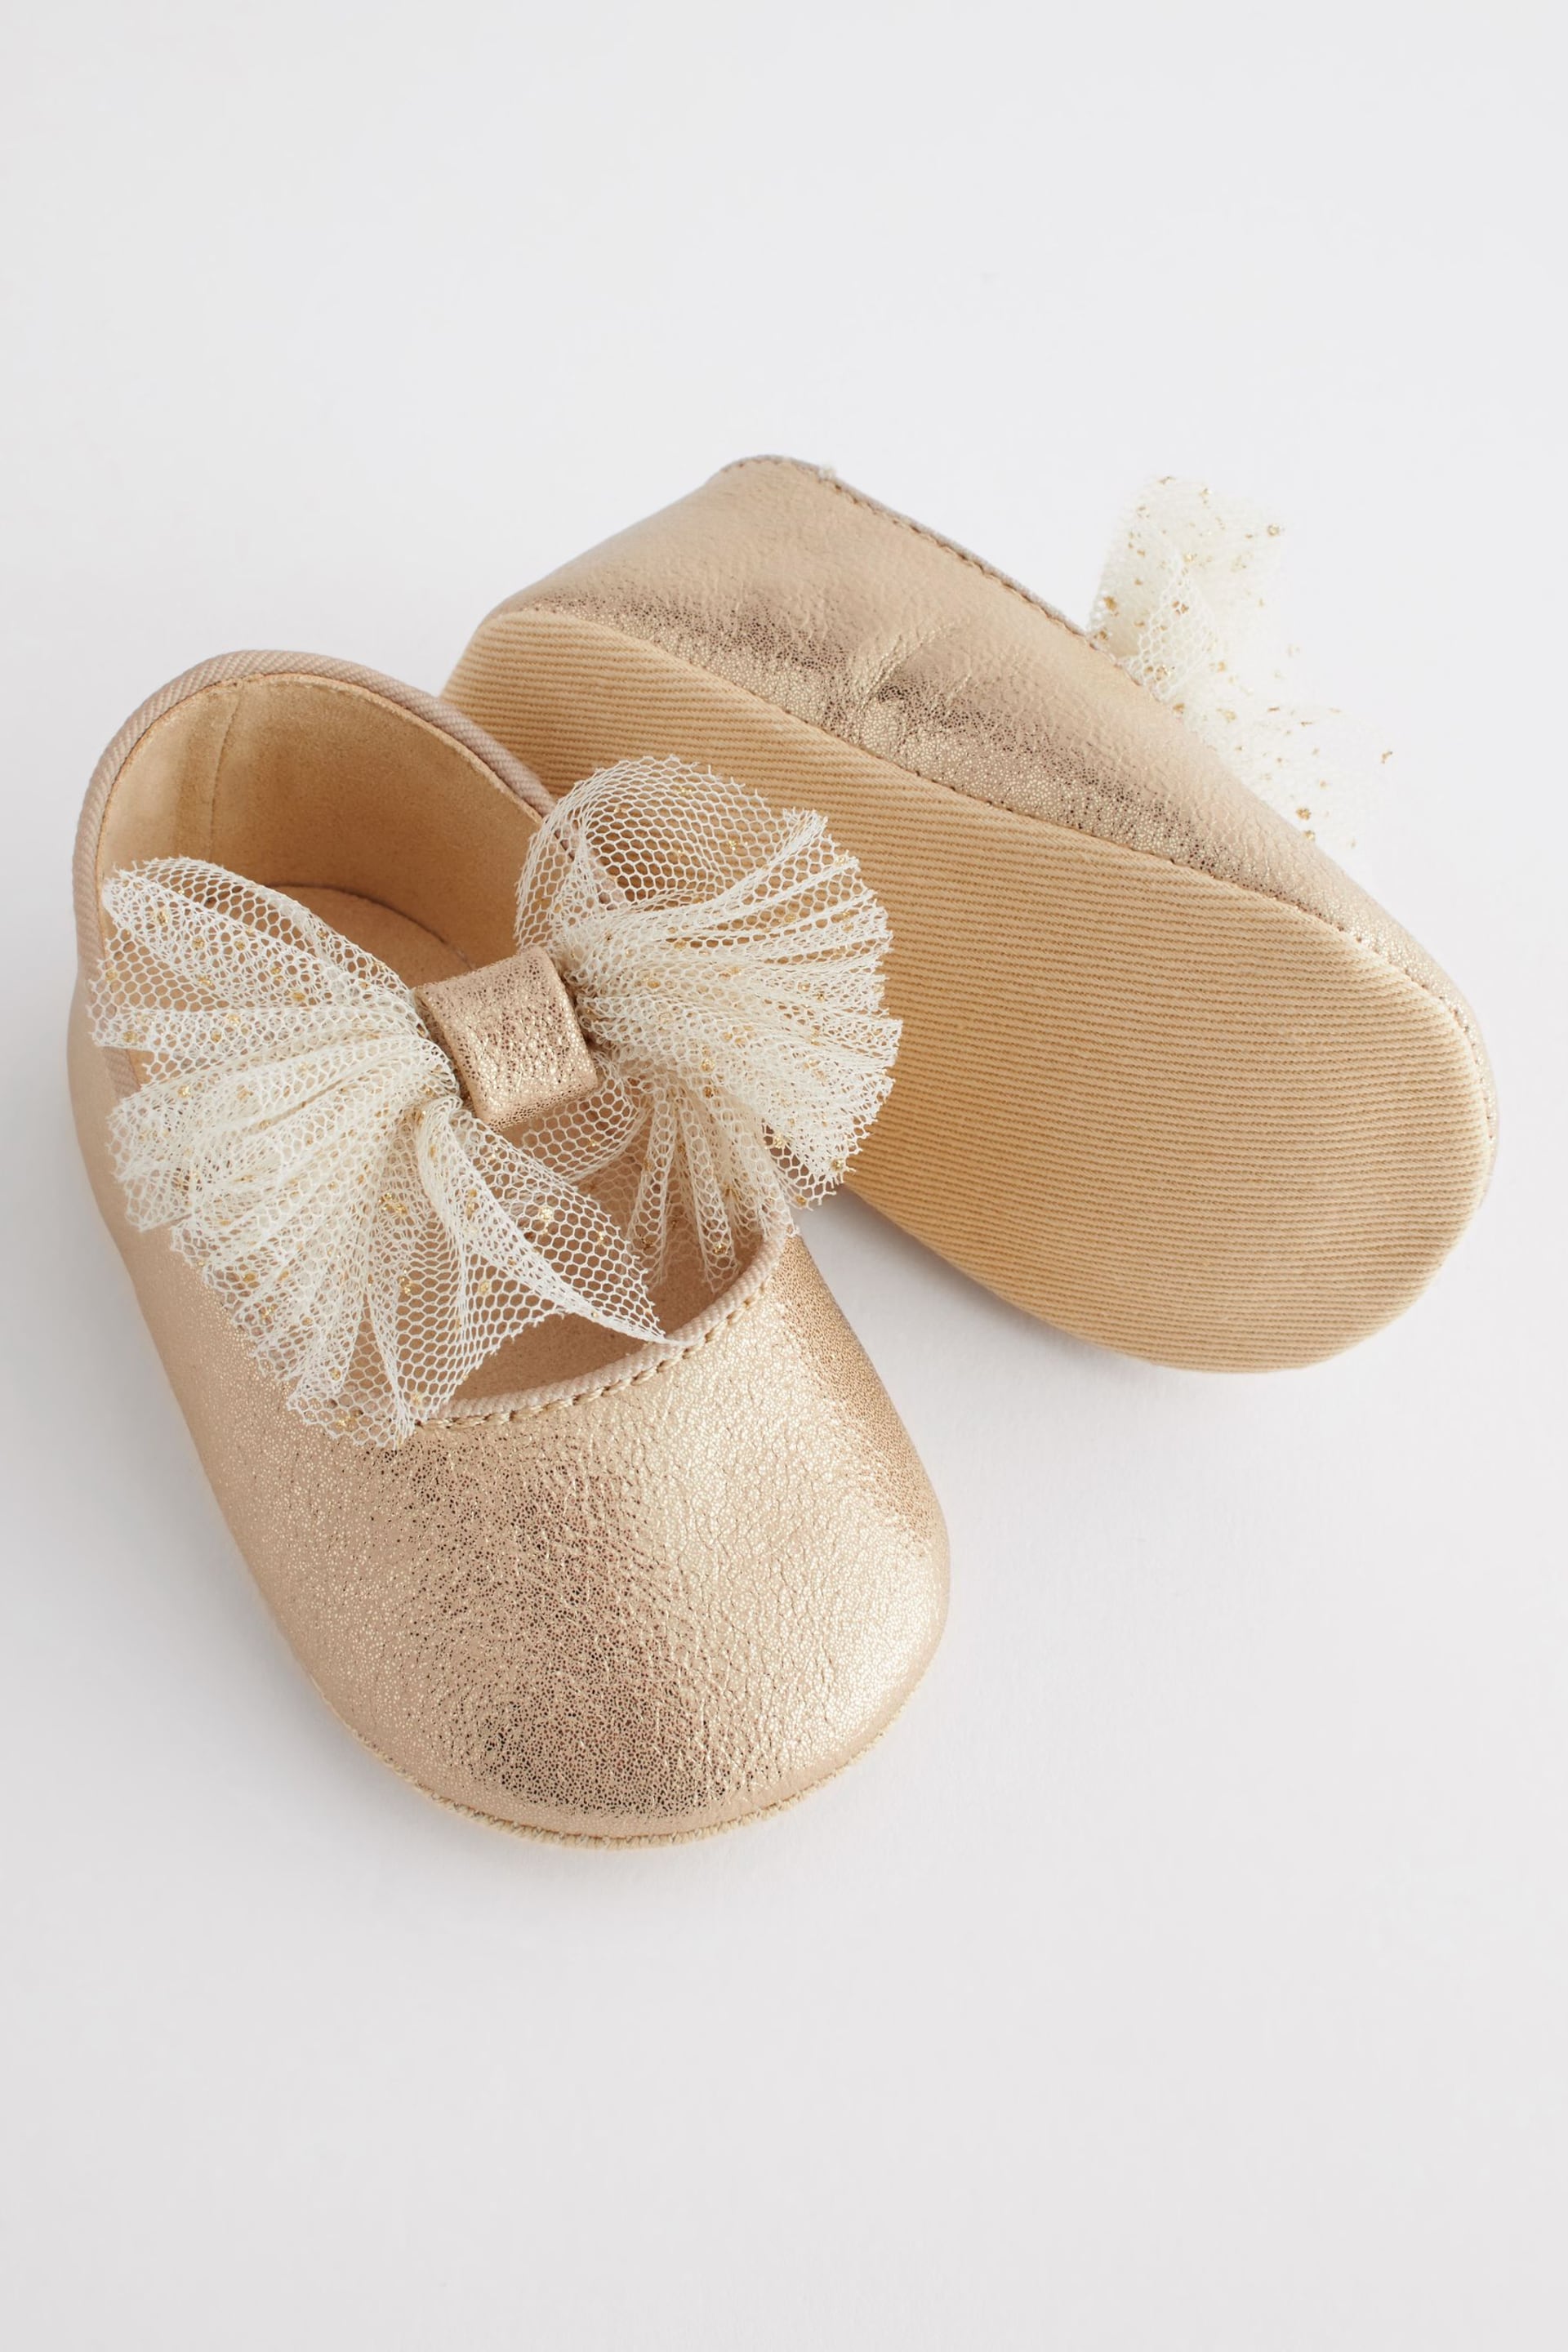 Gold Bow Ballet Occasion Baby Shoes (0-24mths) - Image 4 of 6